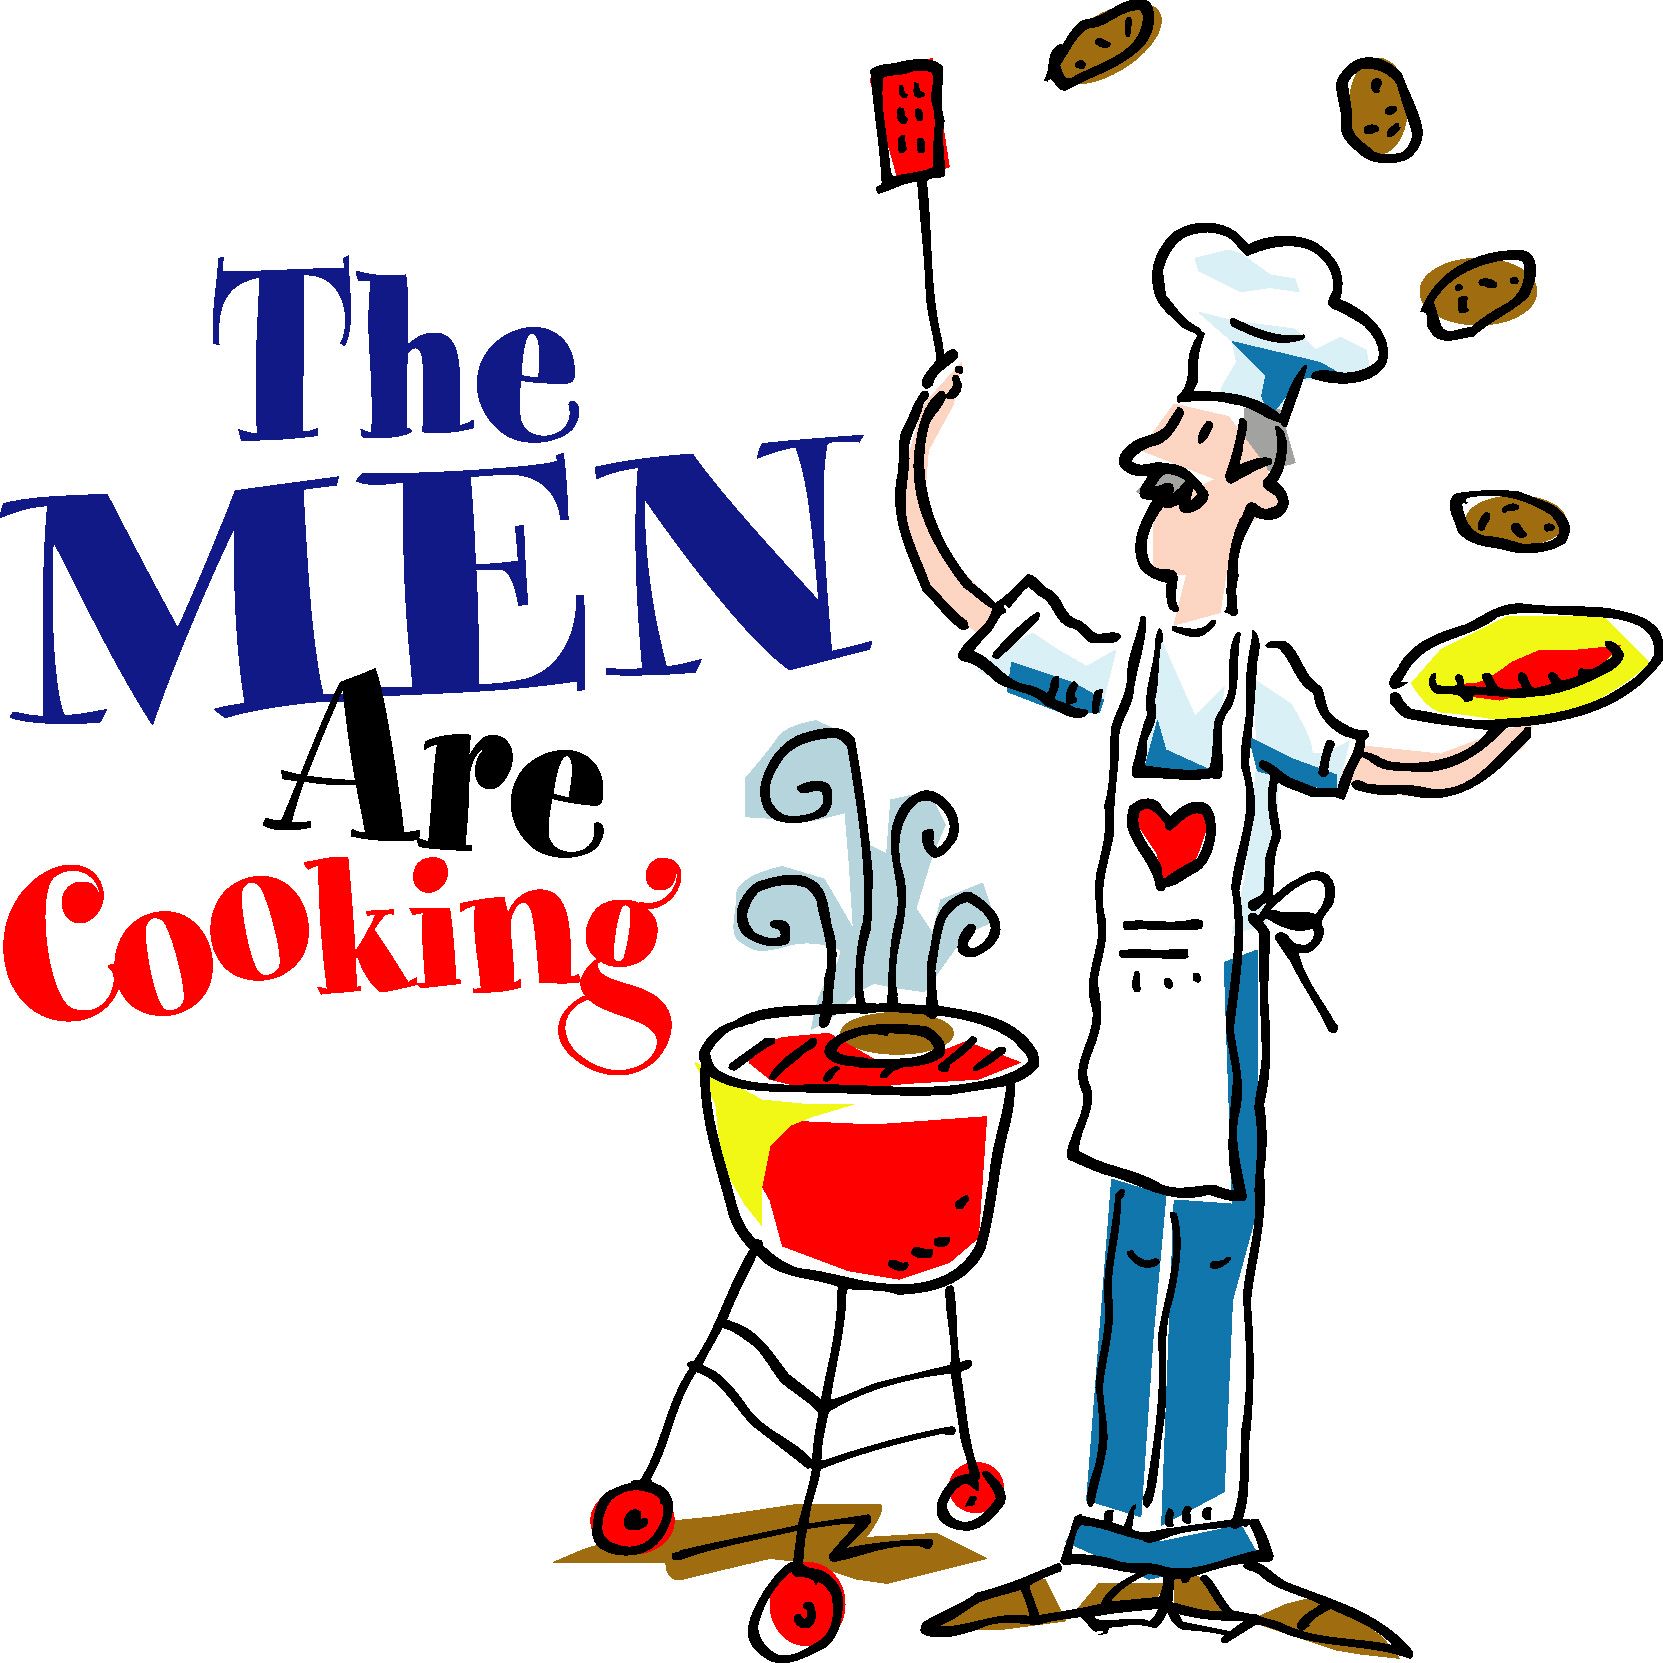 Church Cookout Image Png Clipart